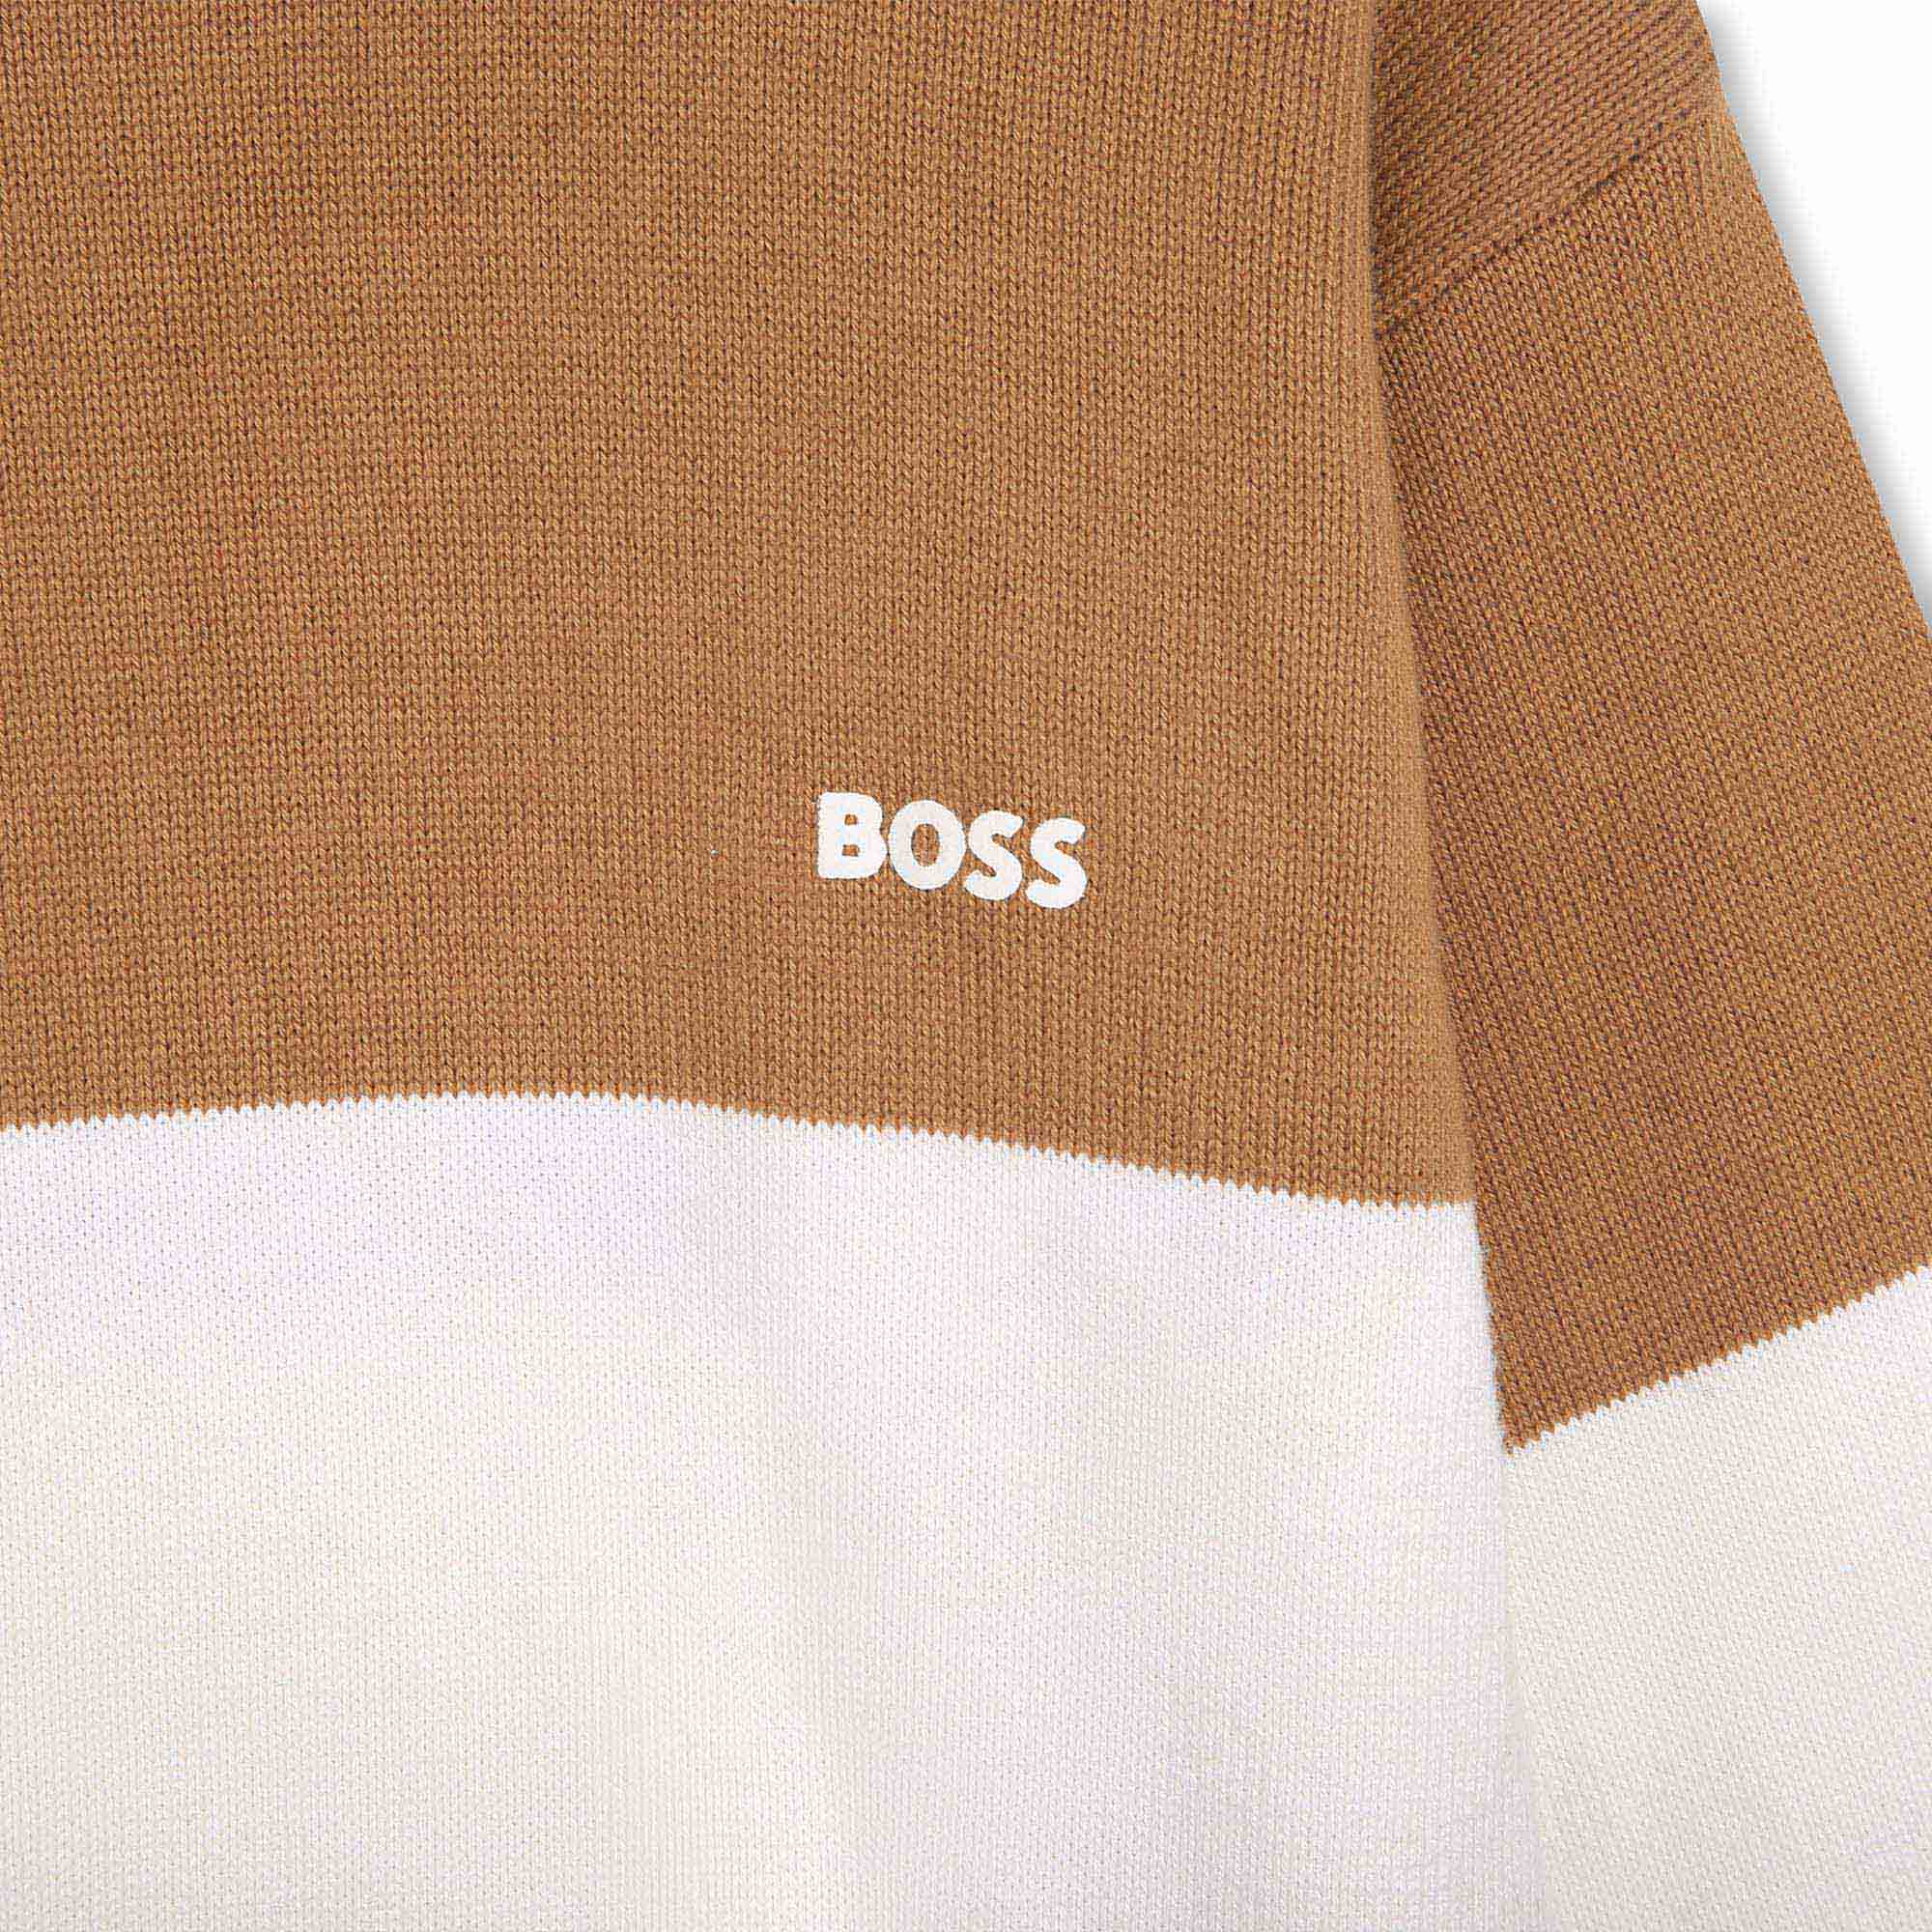 Cotton-and-wool jumper dress BOSS for GIRL